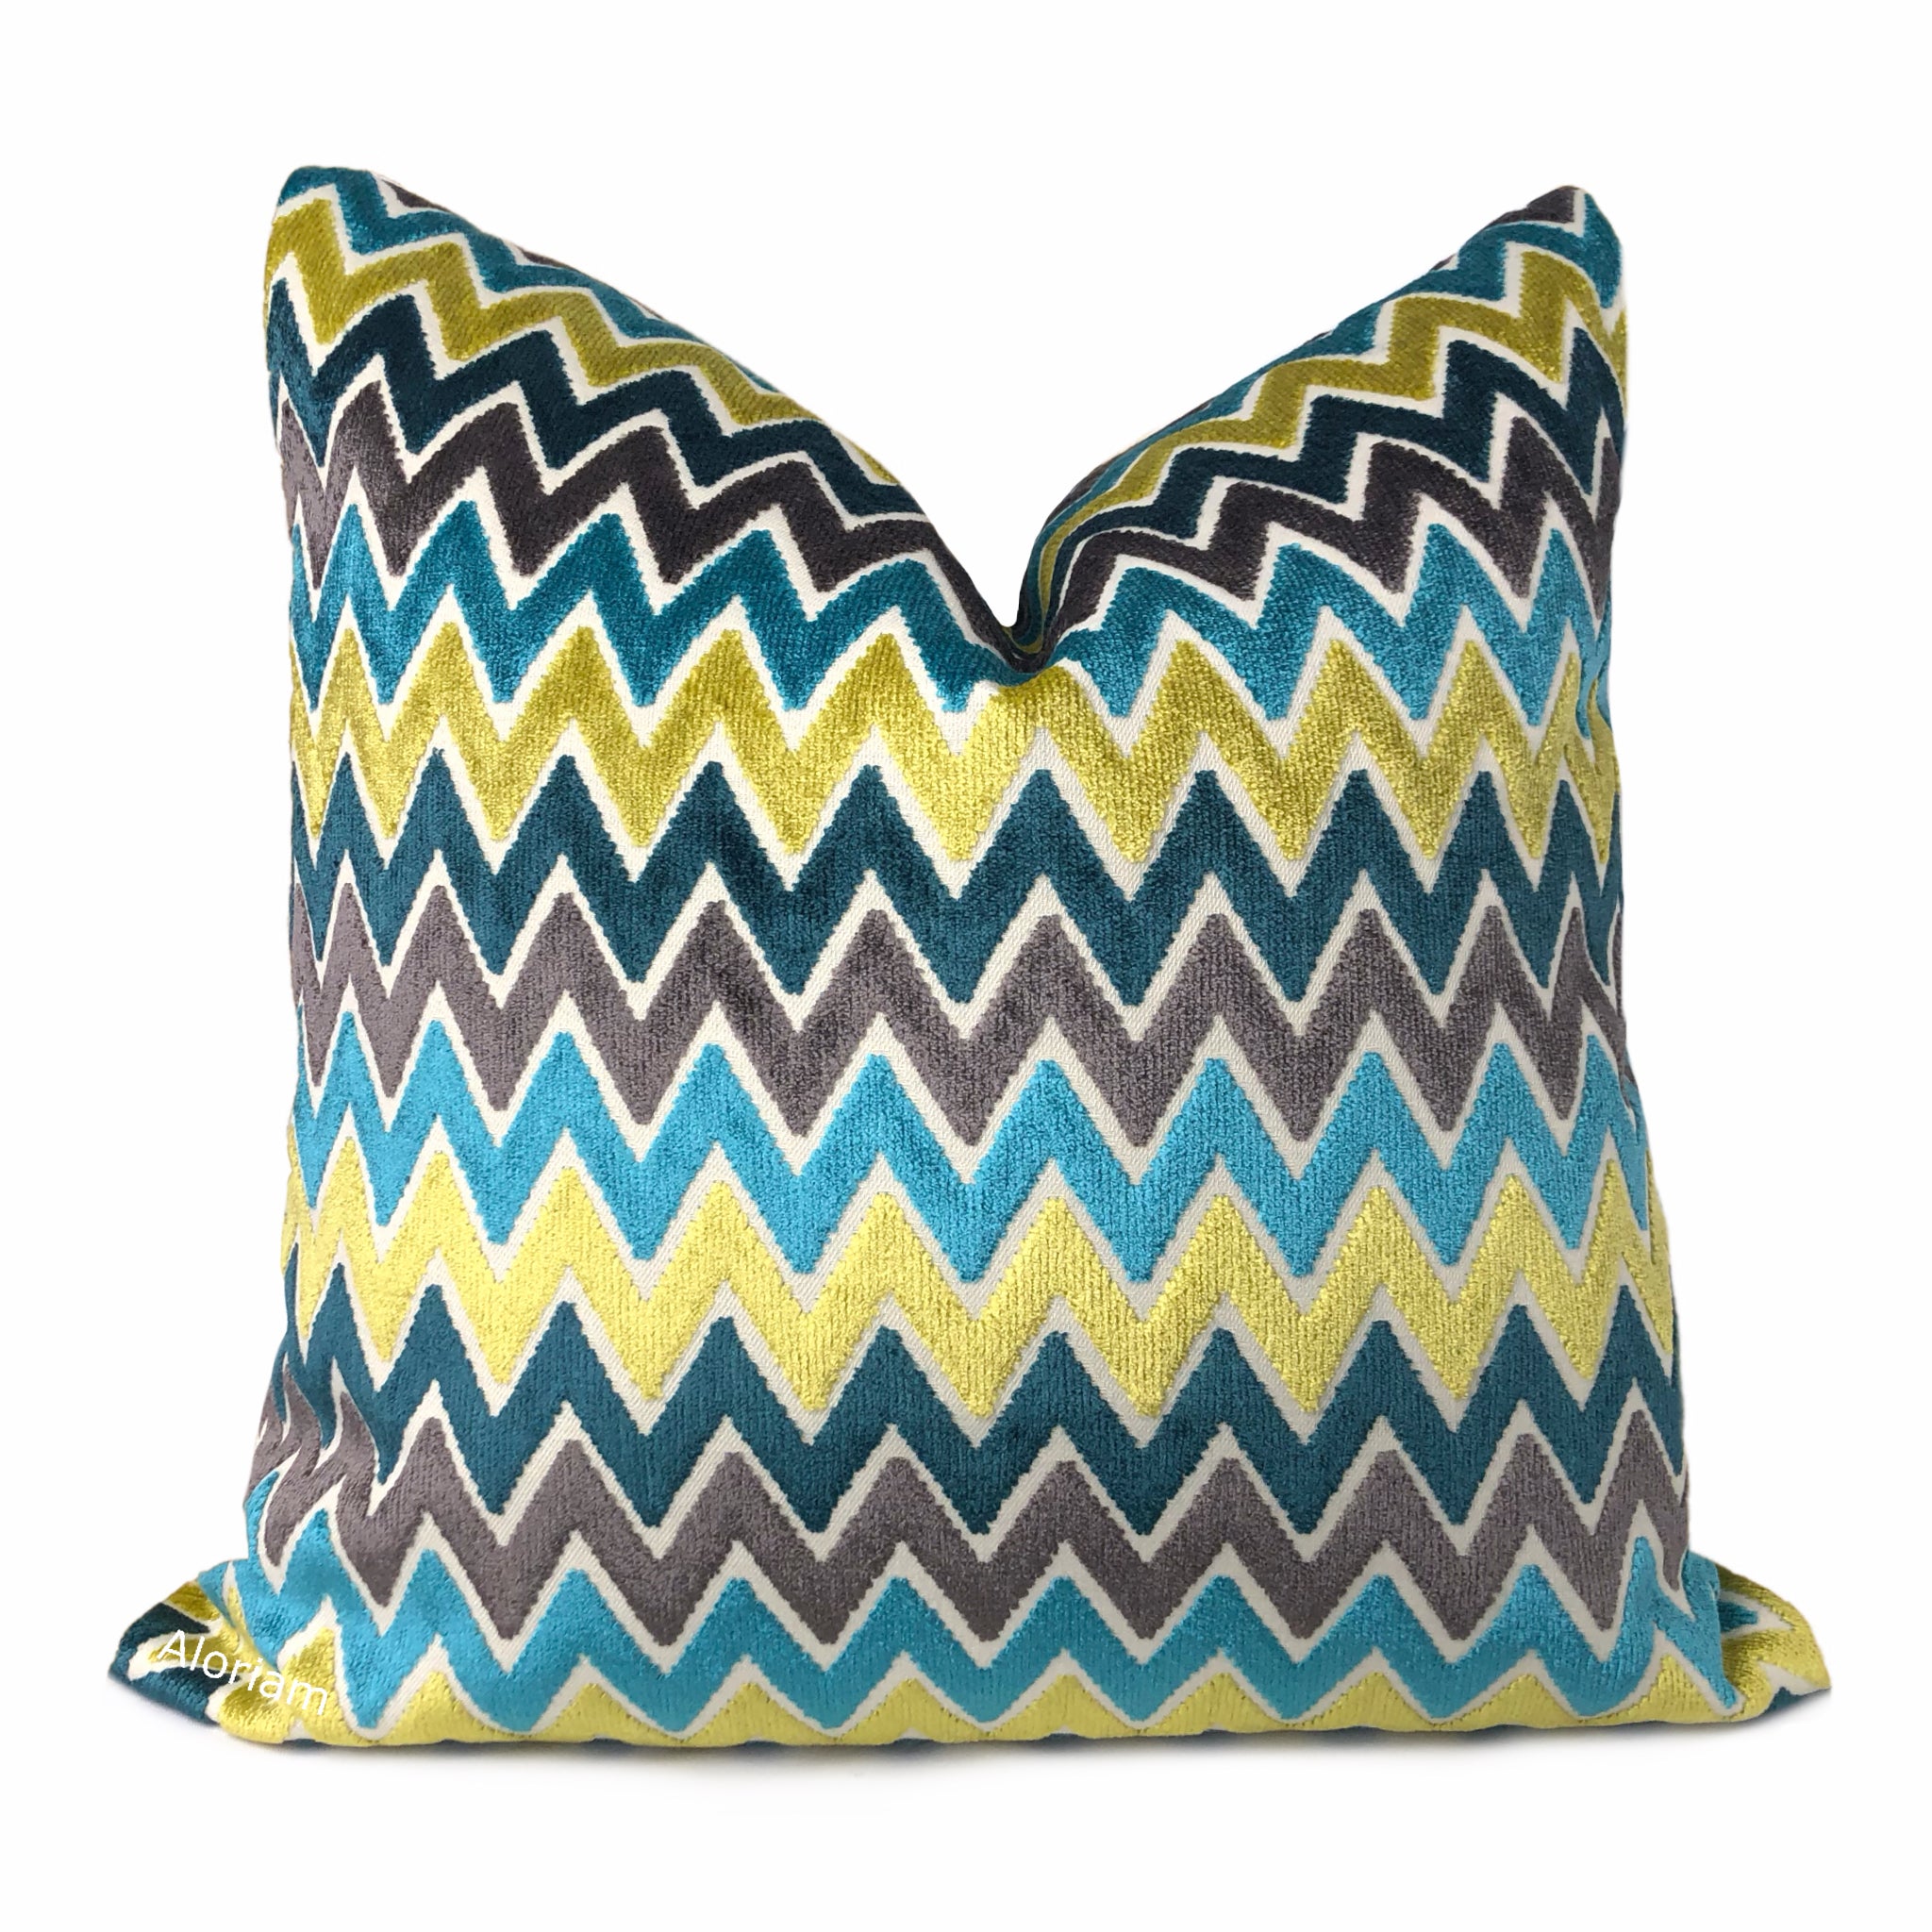 Jeremy Teal Blue Yellow Turquoise Charcoal Chevron Velvet Pillow Cover